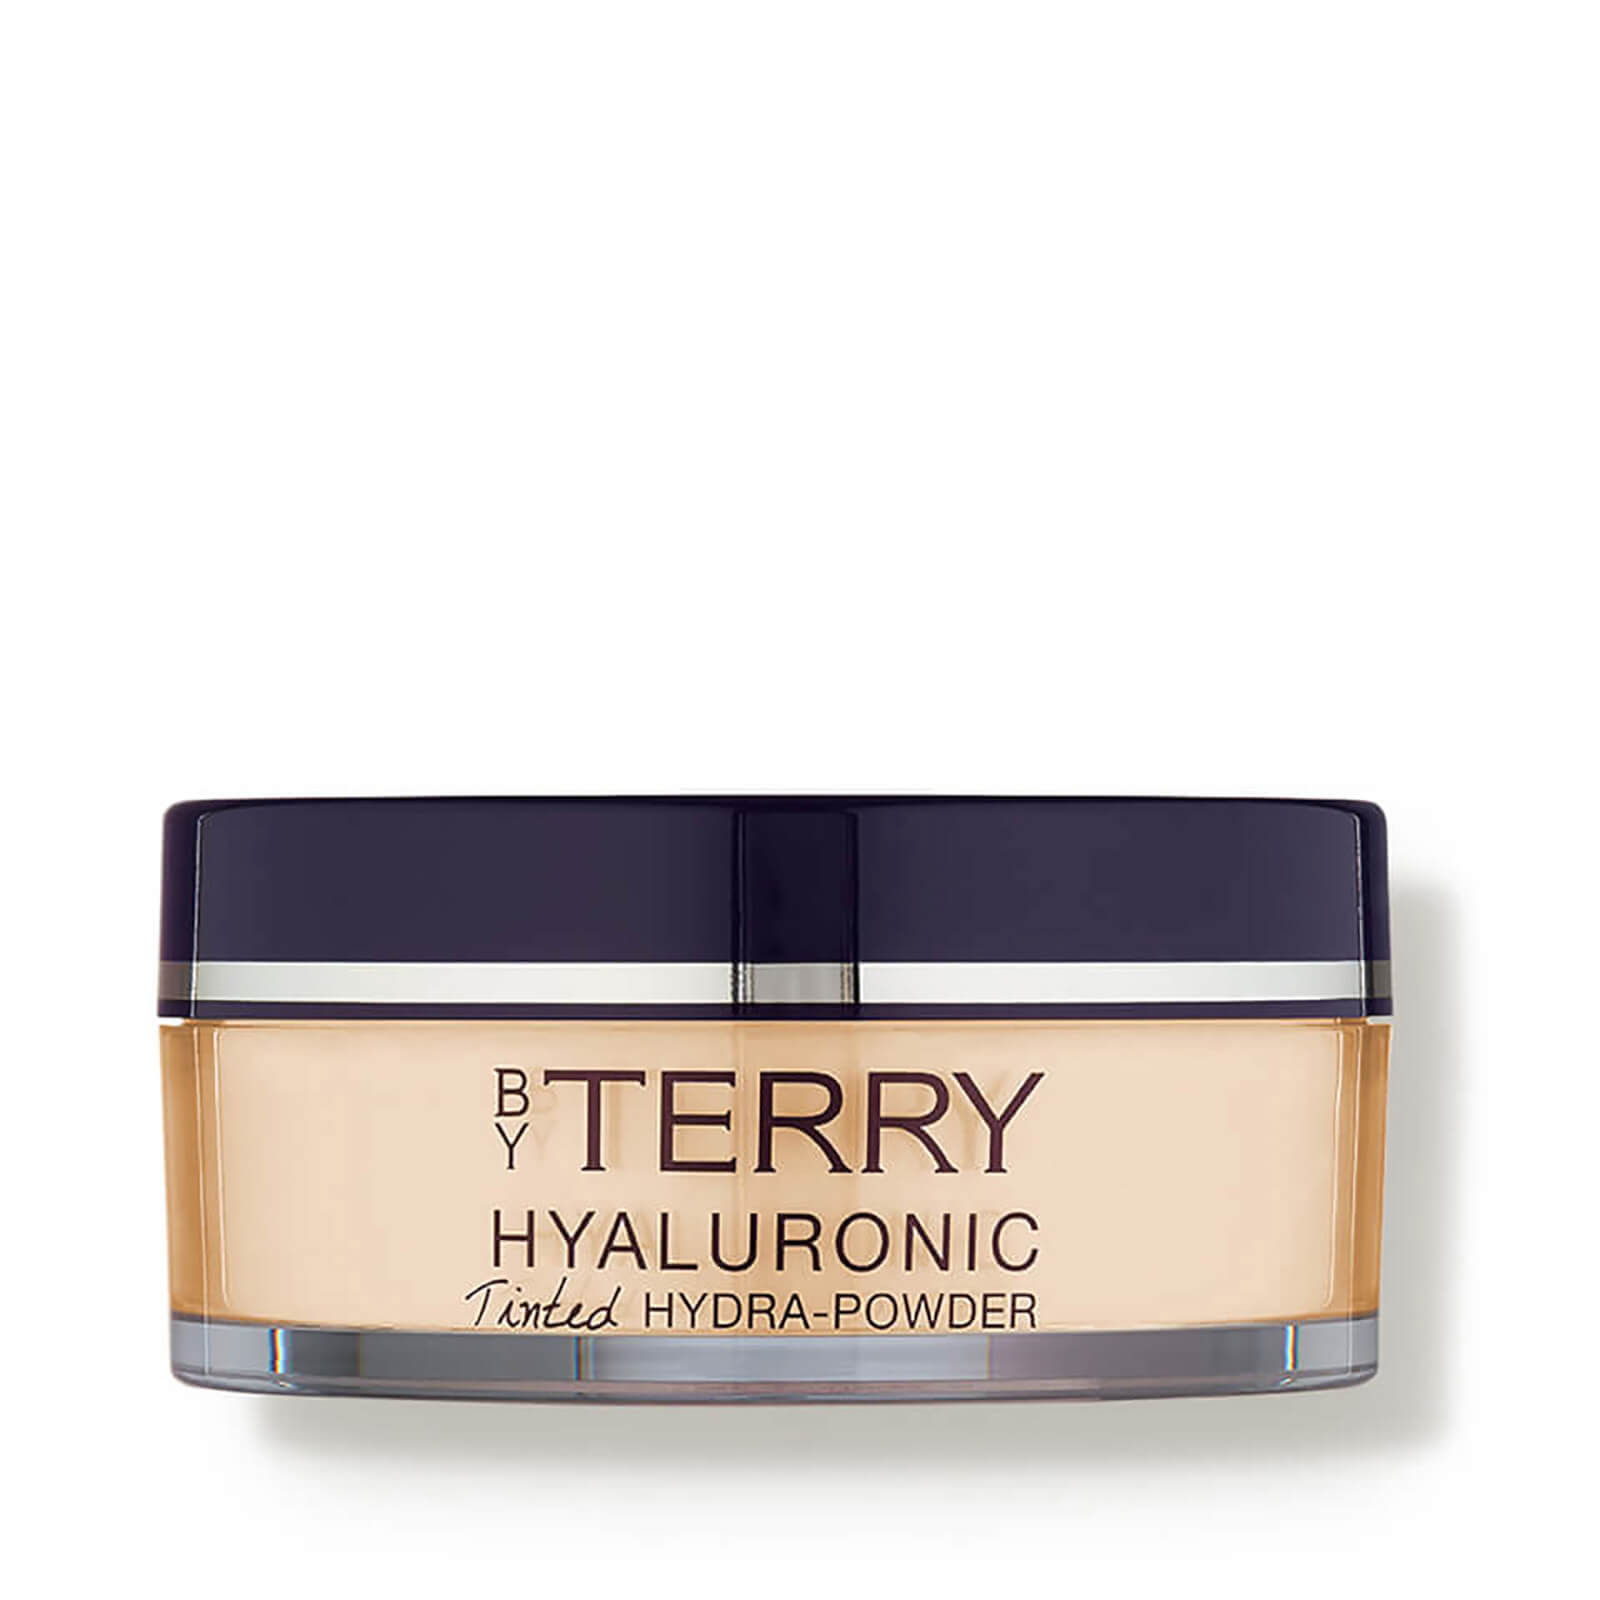 By Terry Hyaluronic Tinted Hydra-Powder 10g (Various Shades) - 6 N100. Fair